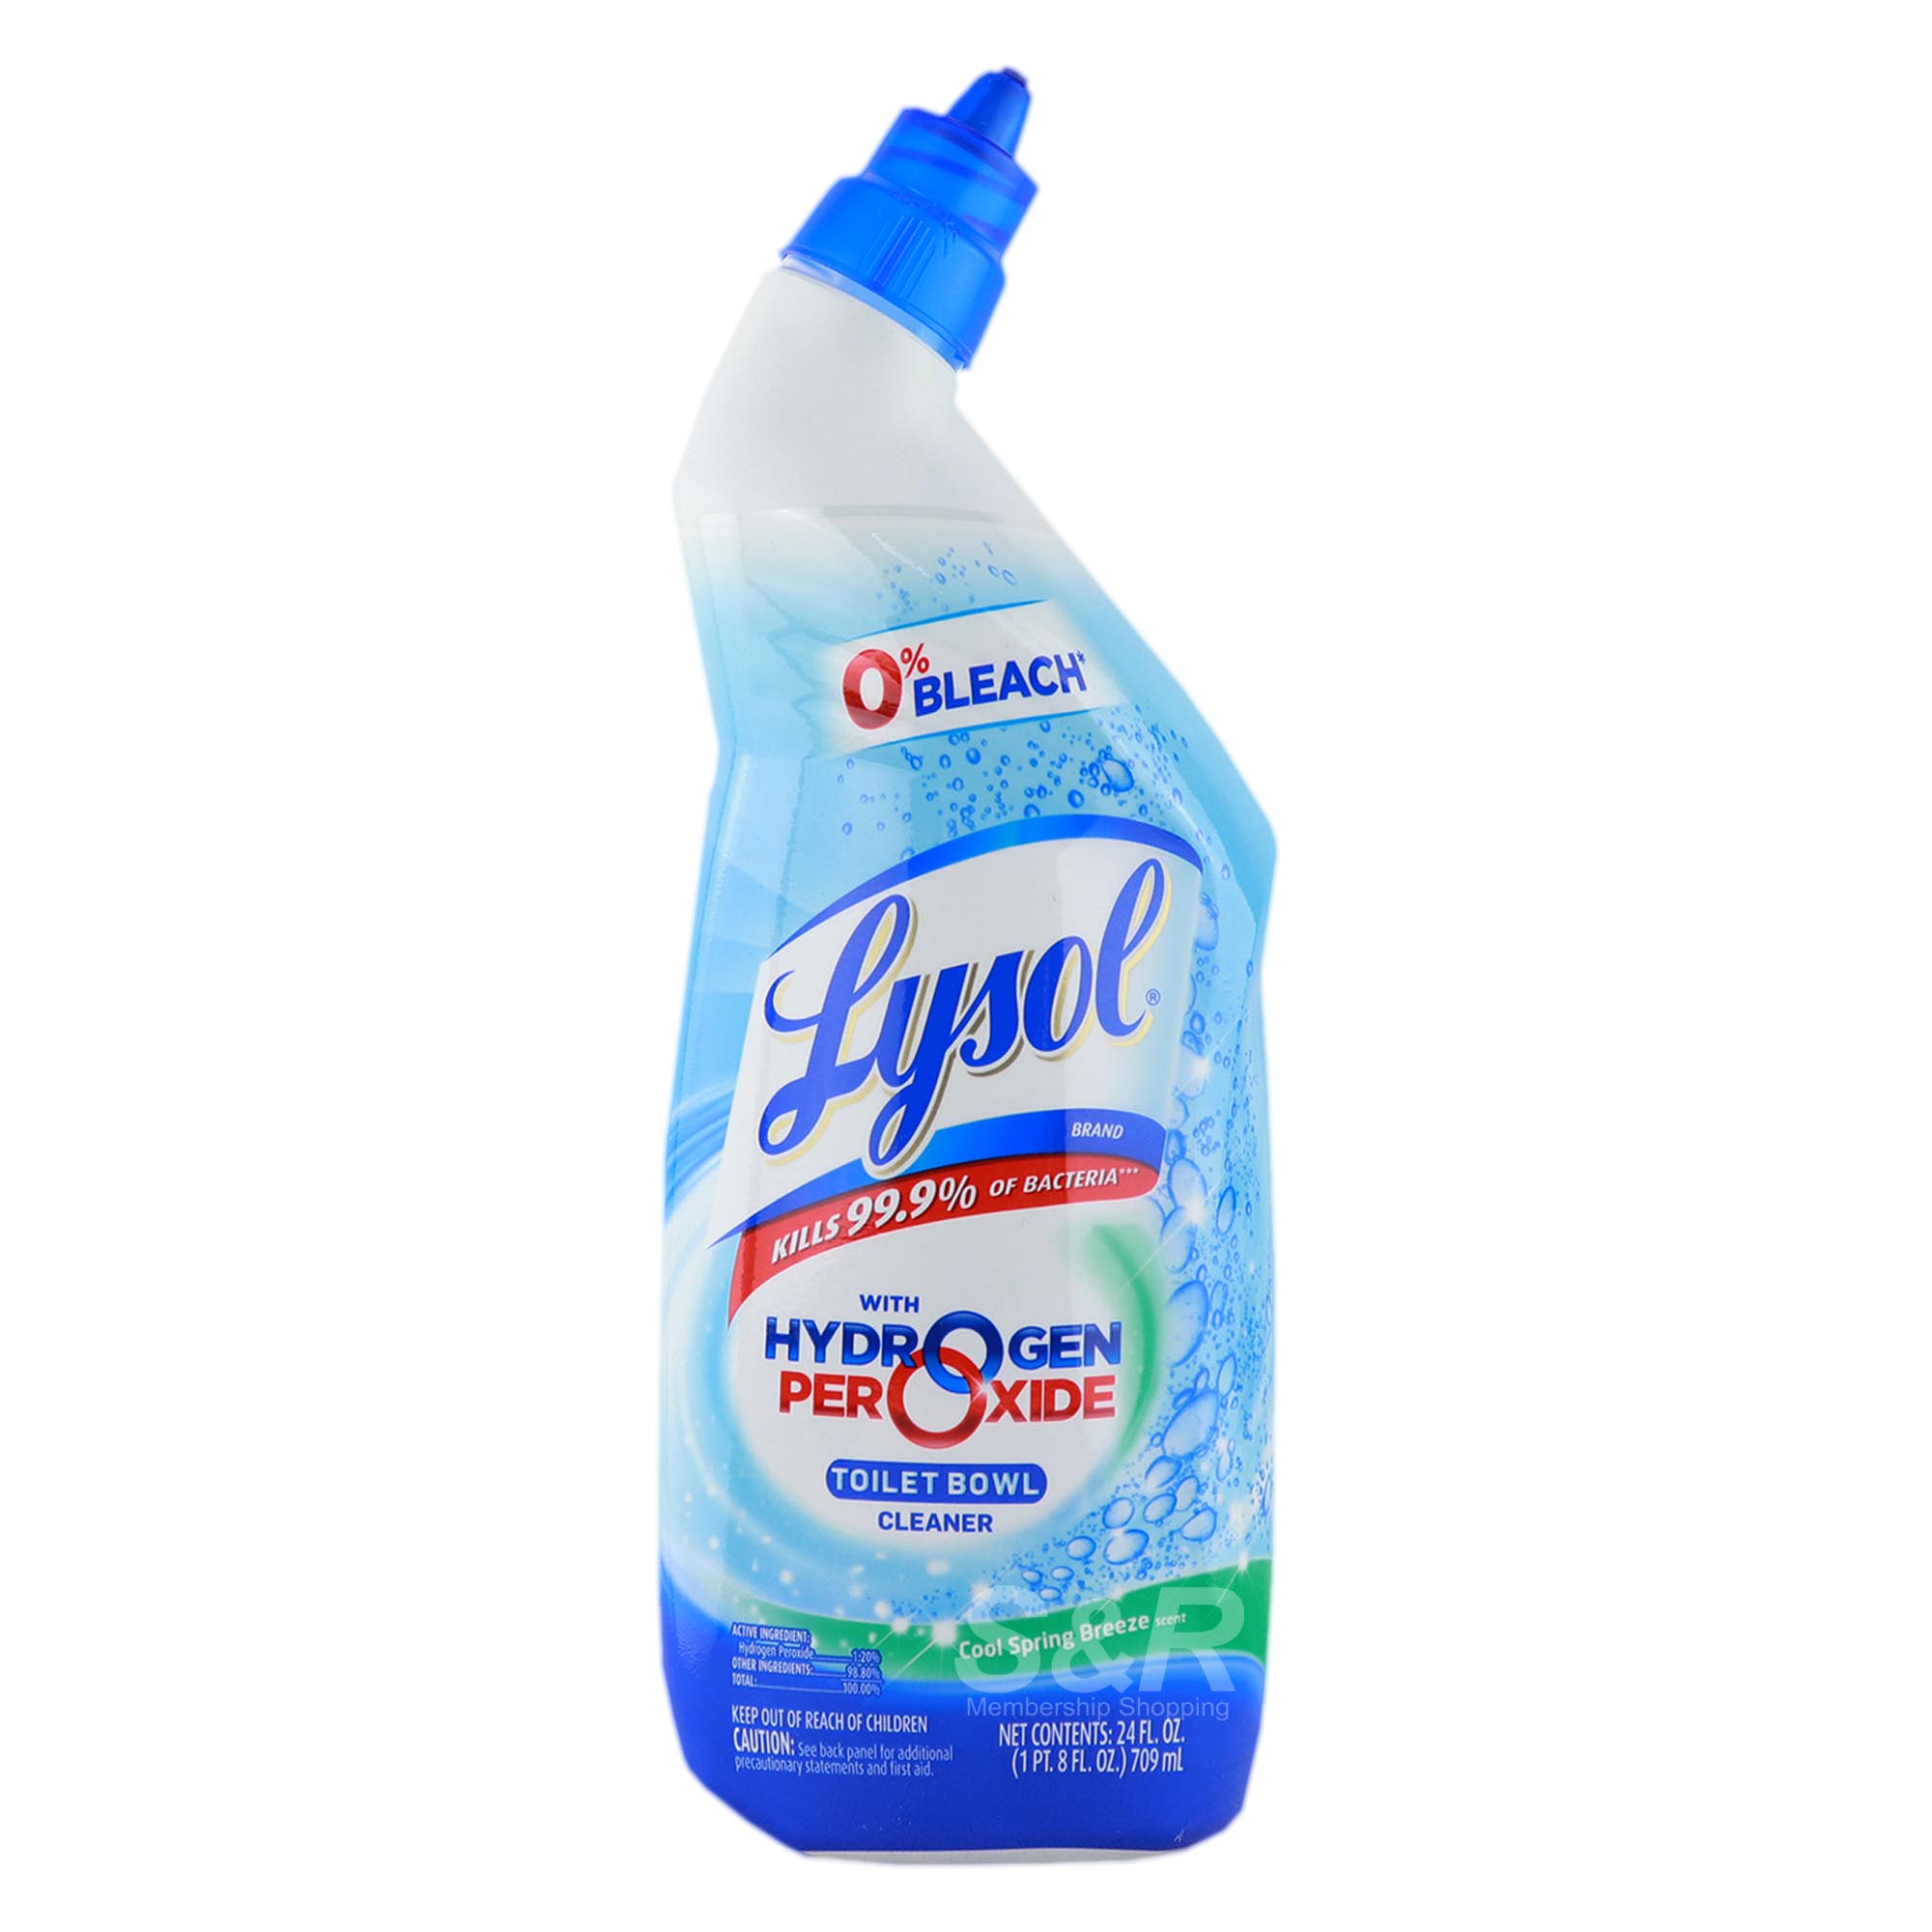 Lysol Toilet Cleaner with Hydrogen Peroxide 709mL